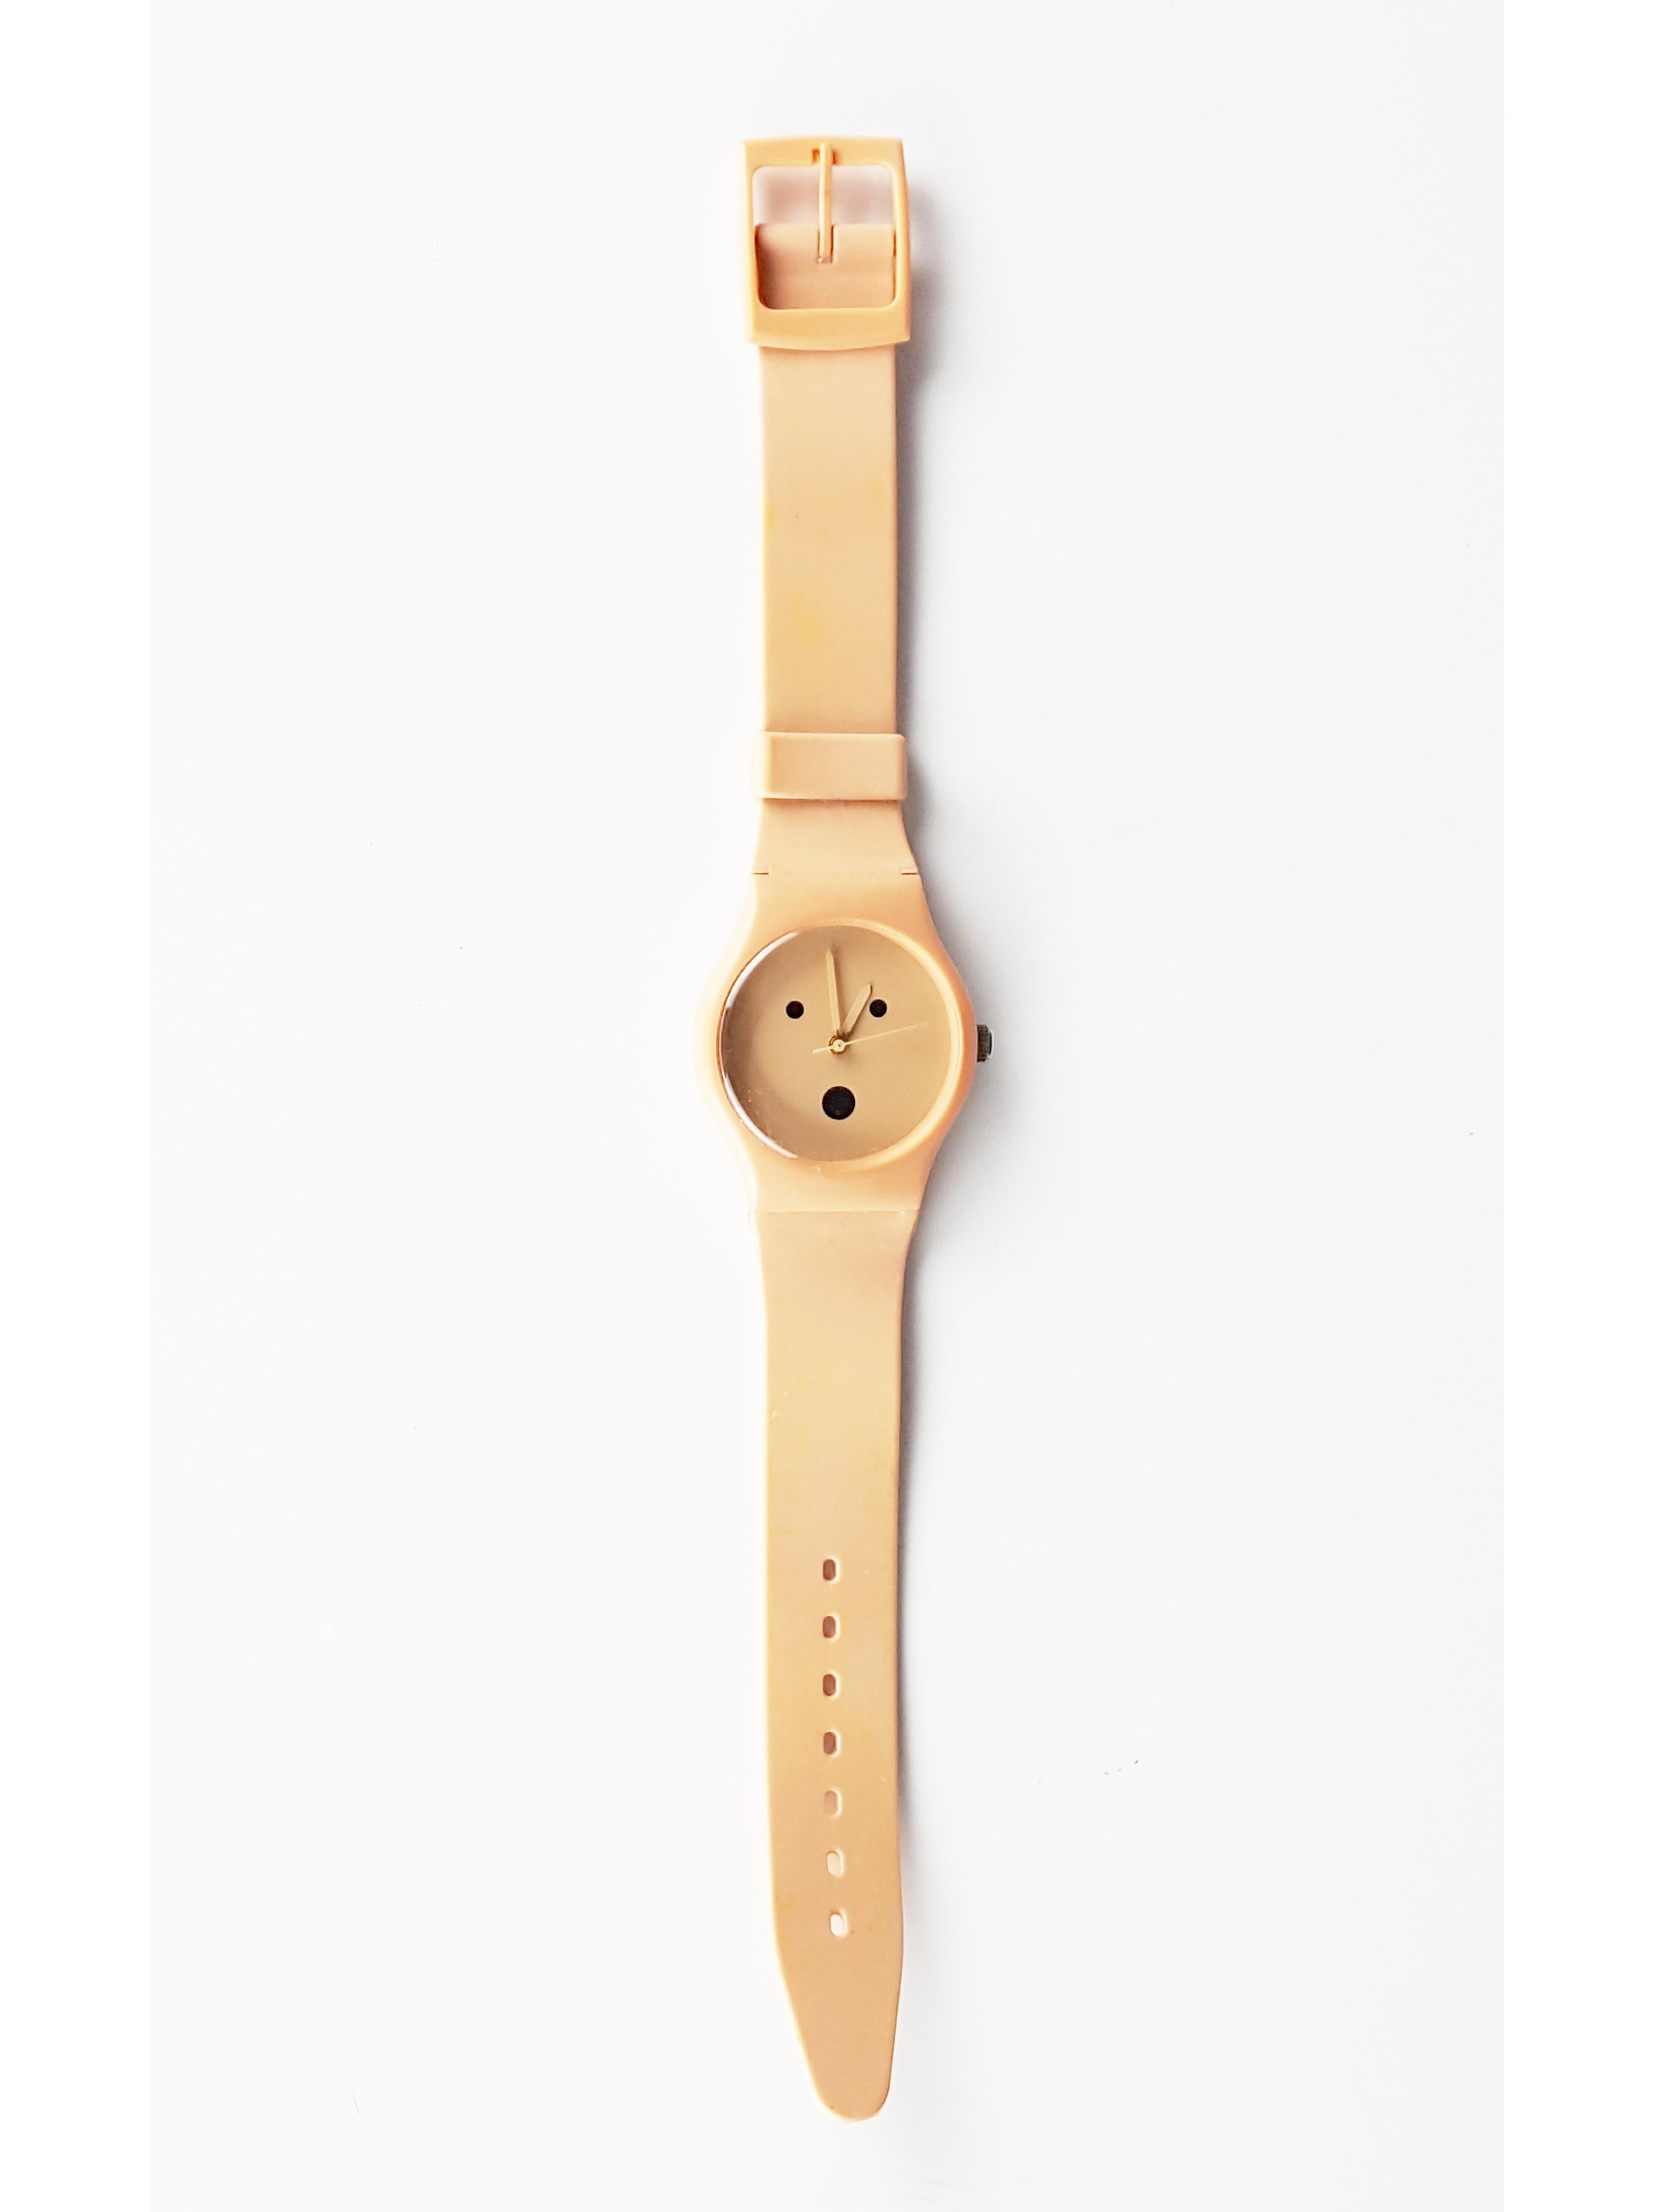 Old Pink Plastic & Rubber '90s Wrist Watch by a. Mendini for Museo Alchimia For Sale 1